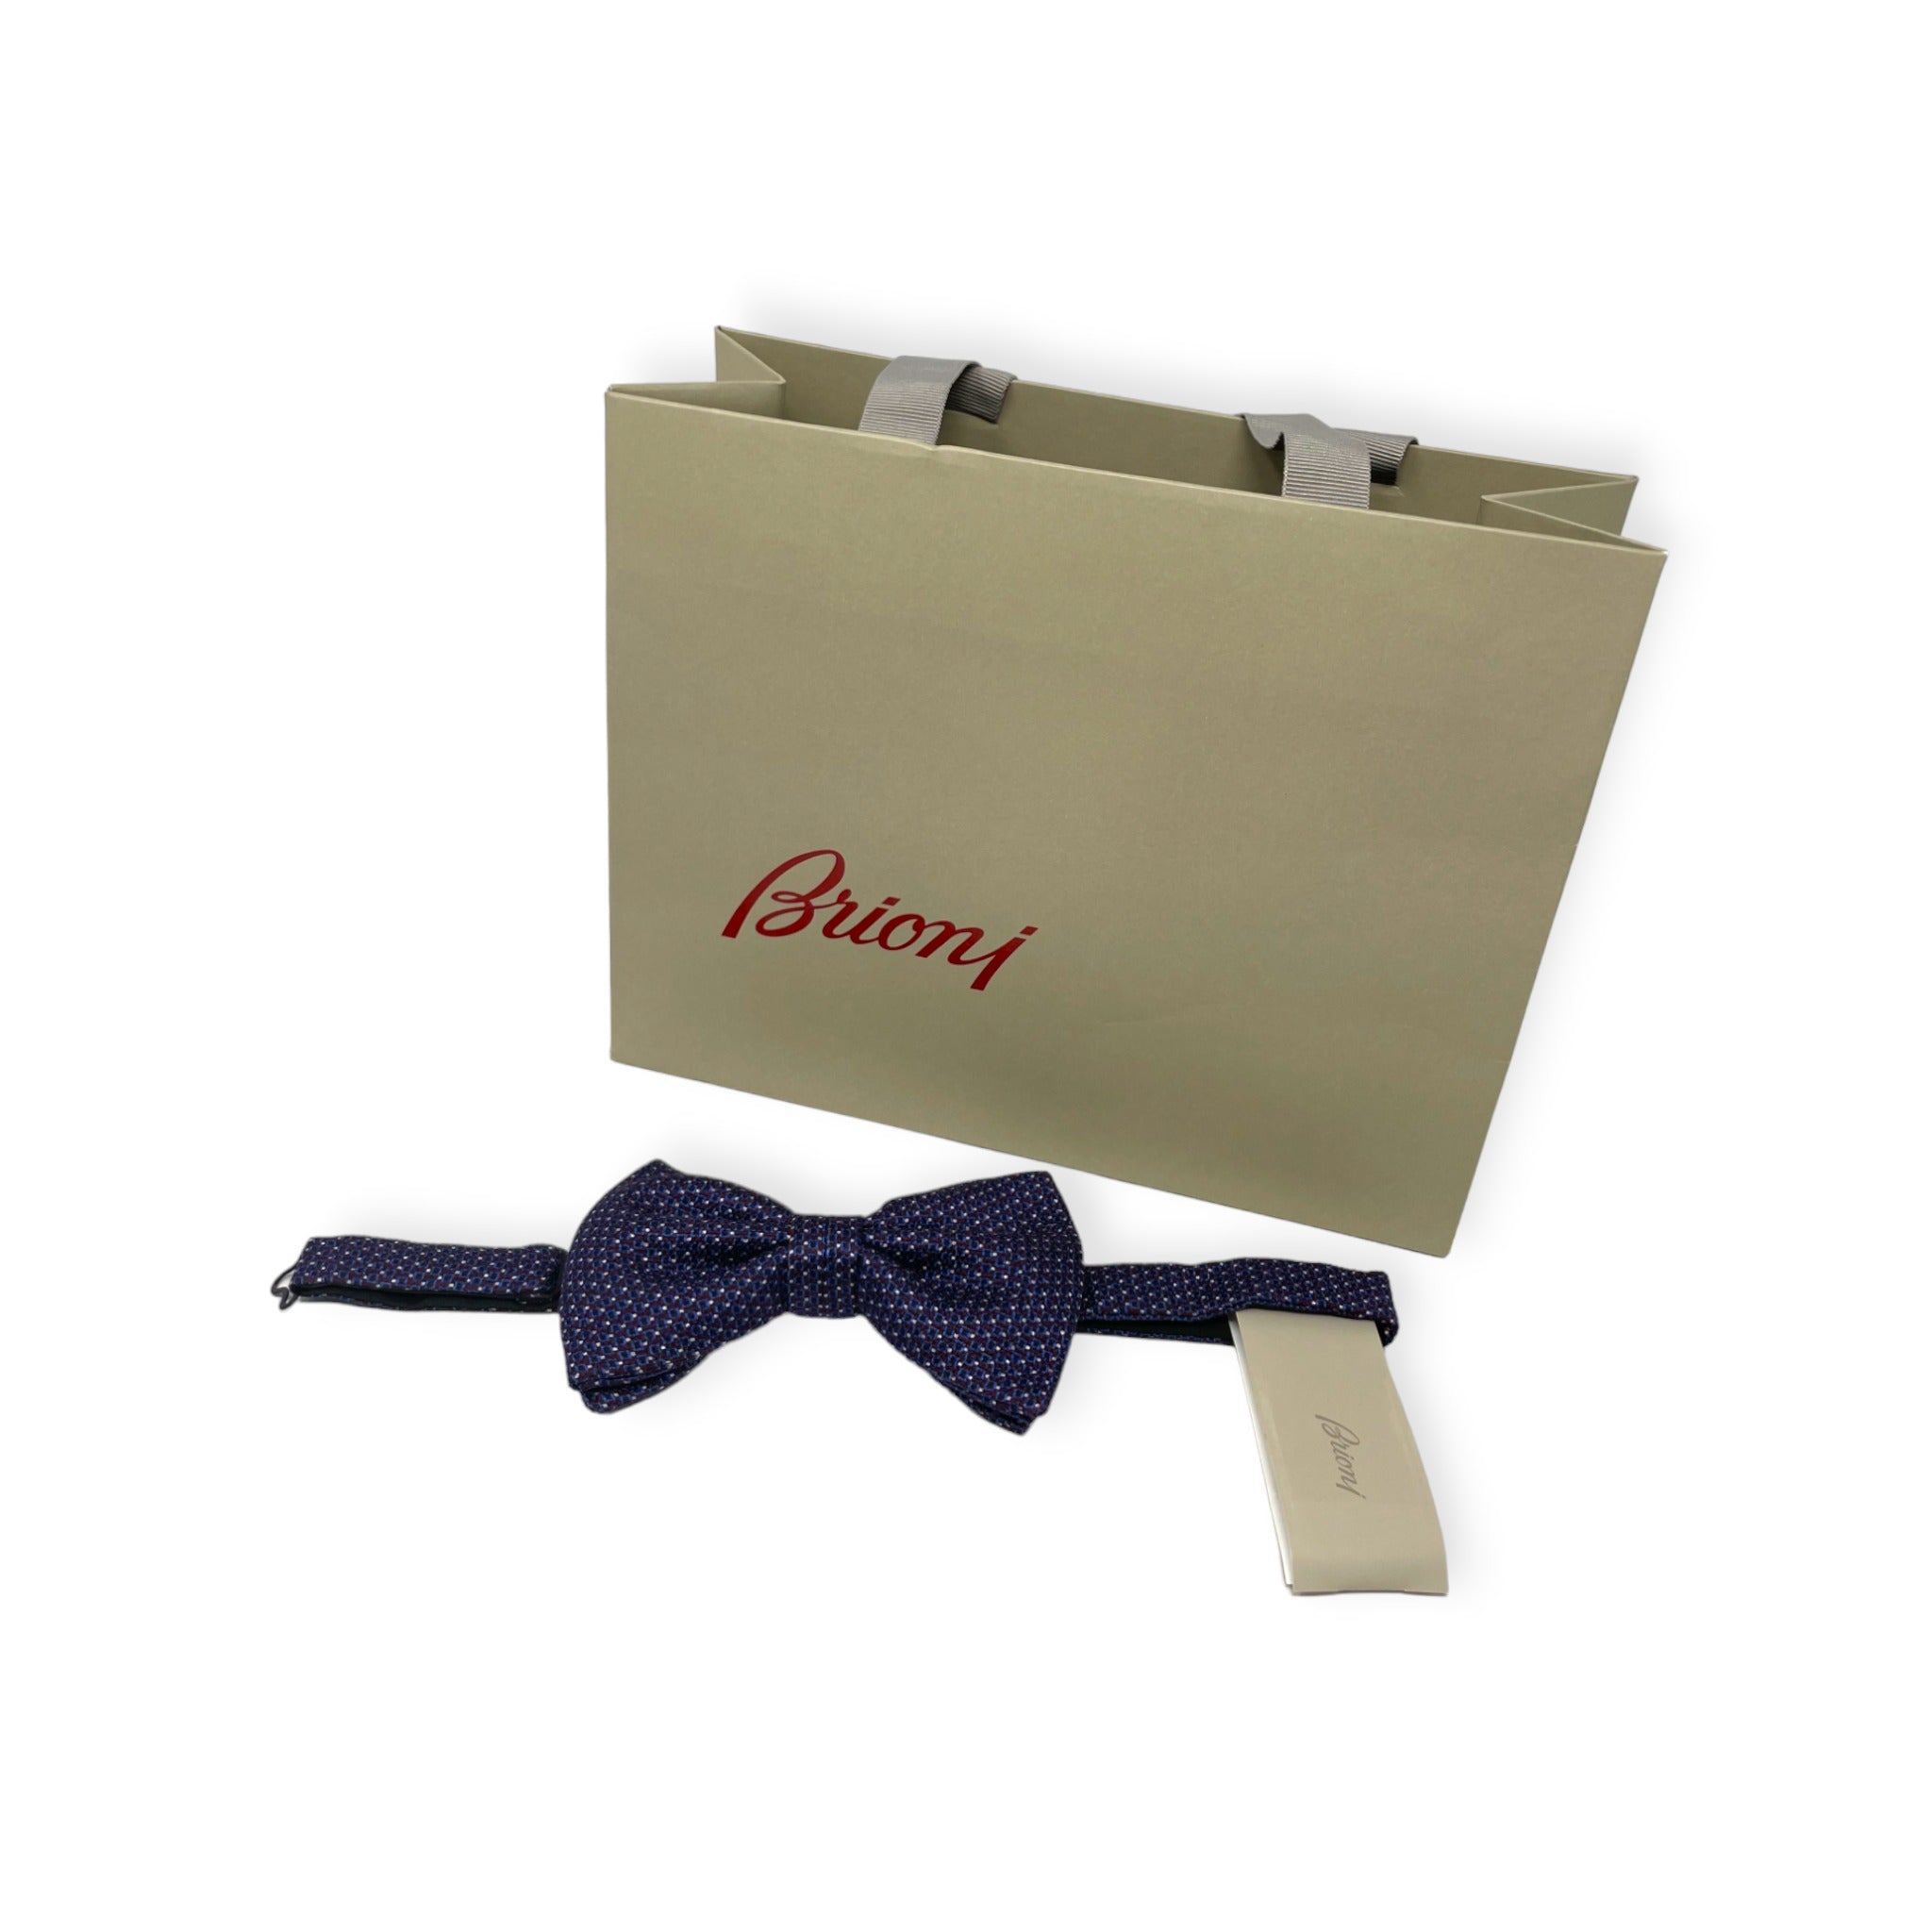 Side view of Brioni bow-tie with gift bag